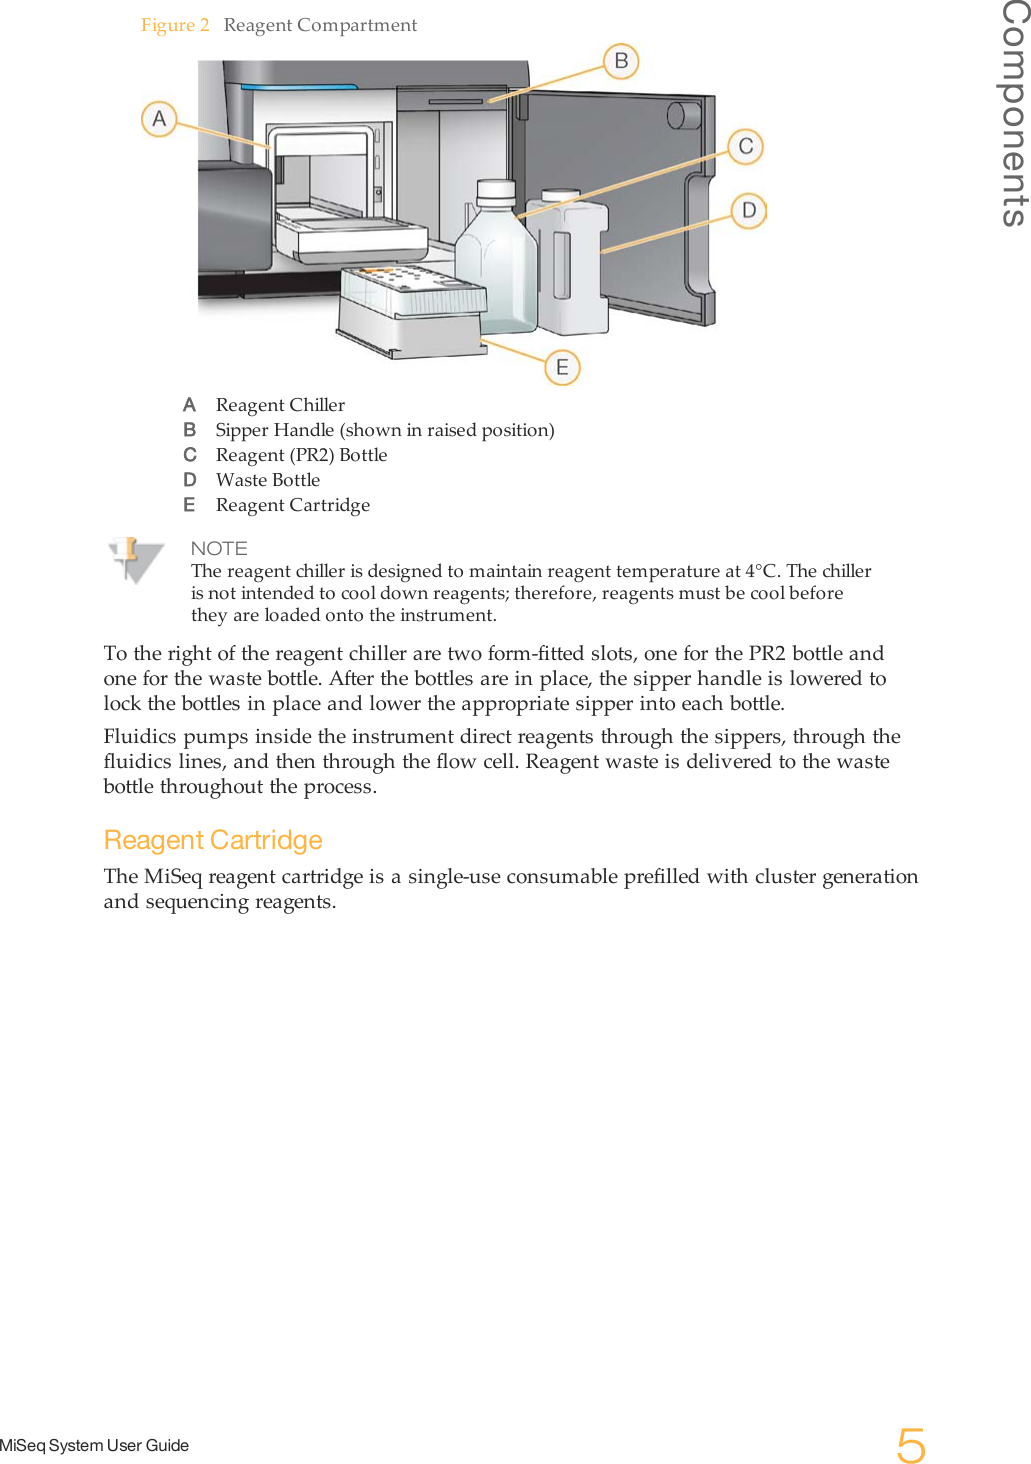 ComponentsMiSeq System User Guide 5Figure 2 Reagent CompartmentAReagent ChillerBSipper Handle (shown in raised position)CReagent (PR2) BottleDWaste BottleEReagent CartridgeNOTEThe reagent chiller is designed to maintain reagent temperature at 4°C. The chilleris not intended to cool down reagents; therefore, reagents must be cool beforethey are loaded onto the instrument.To the right of the reagent chiller are two form-fitted slots, one for the PR2 bottle andone for the waste bottle. After the bottles are in place, the sipper handle is lowered tolock the bottles in place and lower the appropriate sipper into each bottle.Fluidics pumps inside the instrument direct reagents through the sippers, through thefluidics lines, and then through the flow cell. Reagent waste is delivered to the wastebottle throughout the process.Reagent CartridgeThe MiSeq reagent cartridge is a single-use consumable prefilled with cluster generationand sequencing reagents.